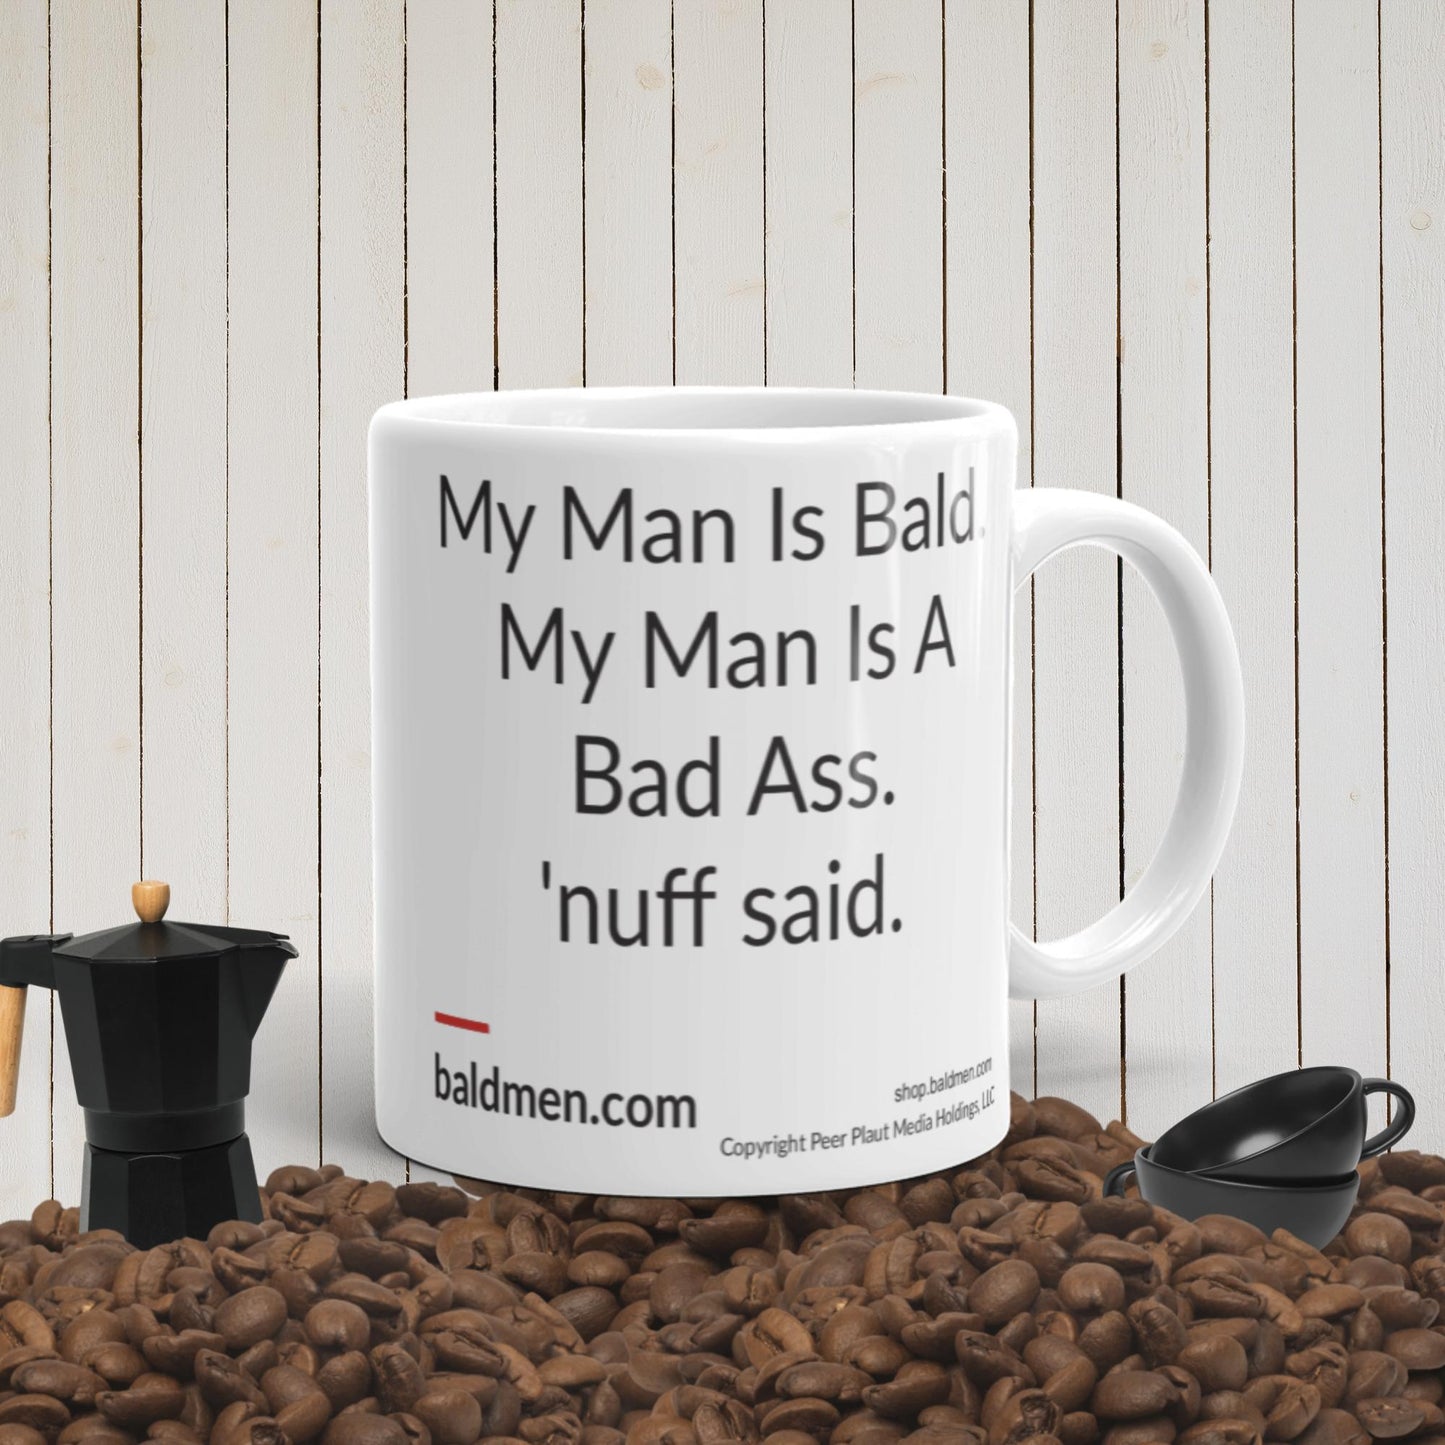 My man may be bald, but he's a total badass - celebrate with our mug.